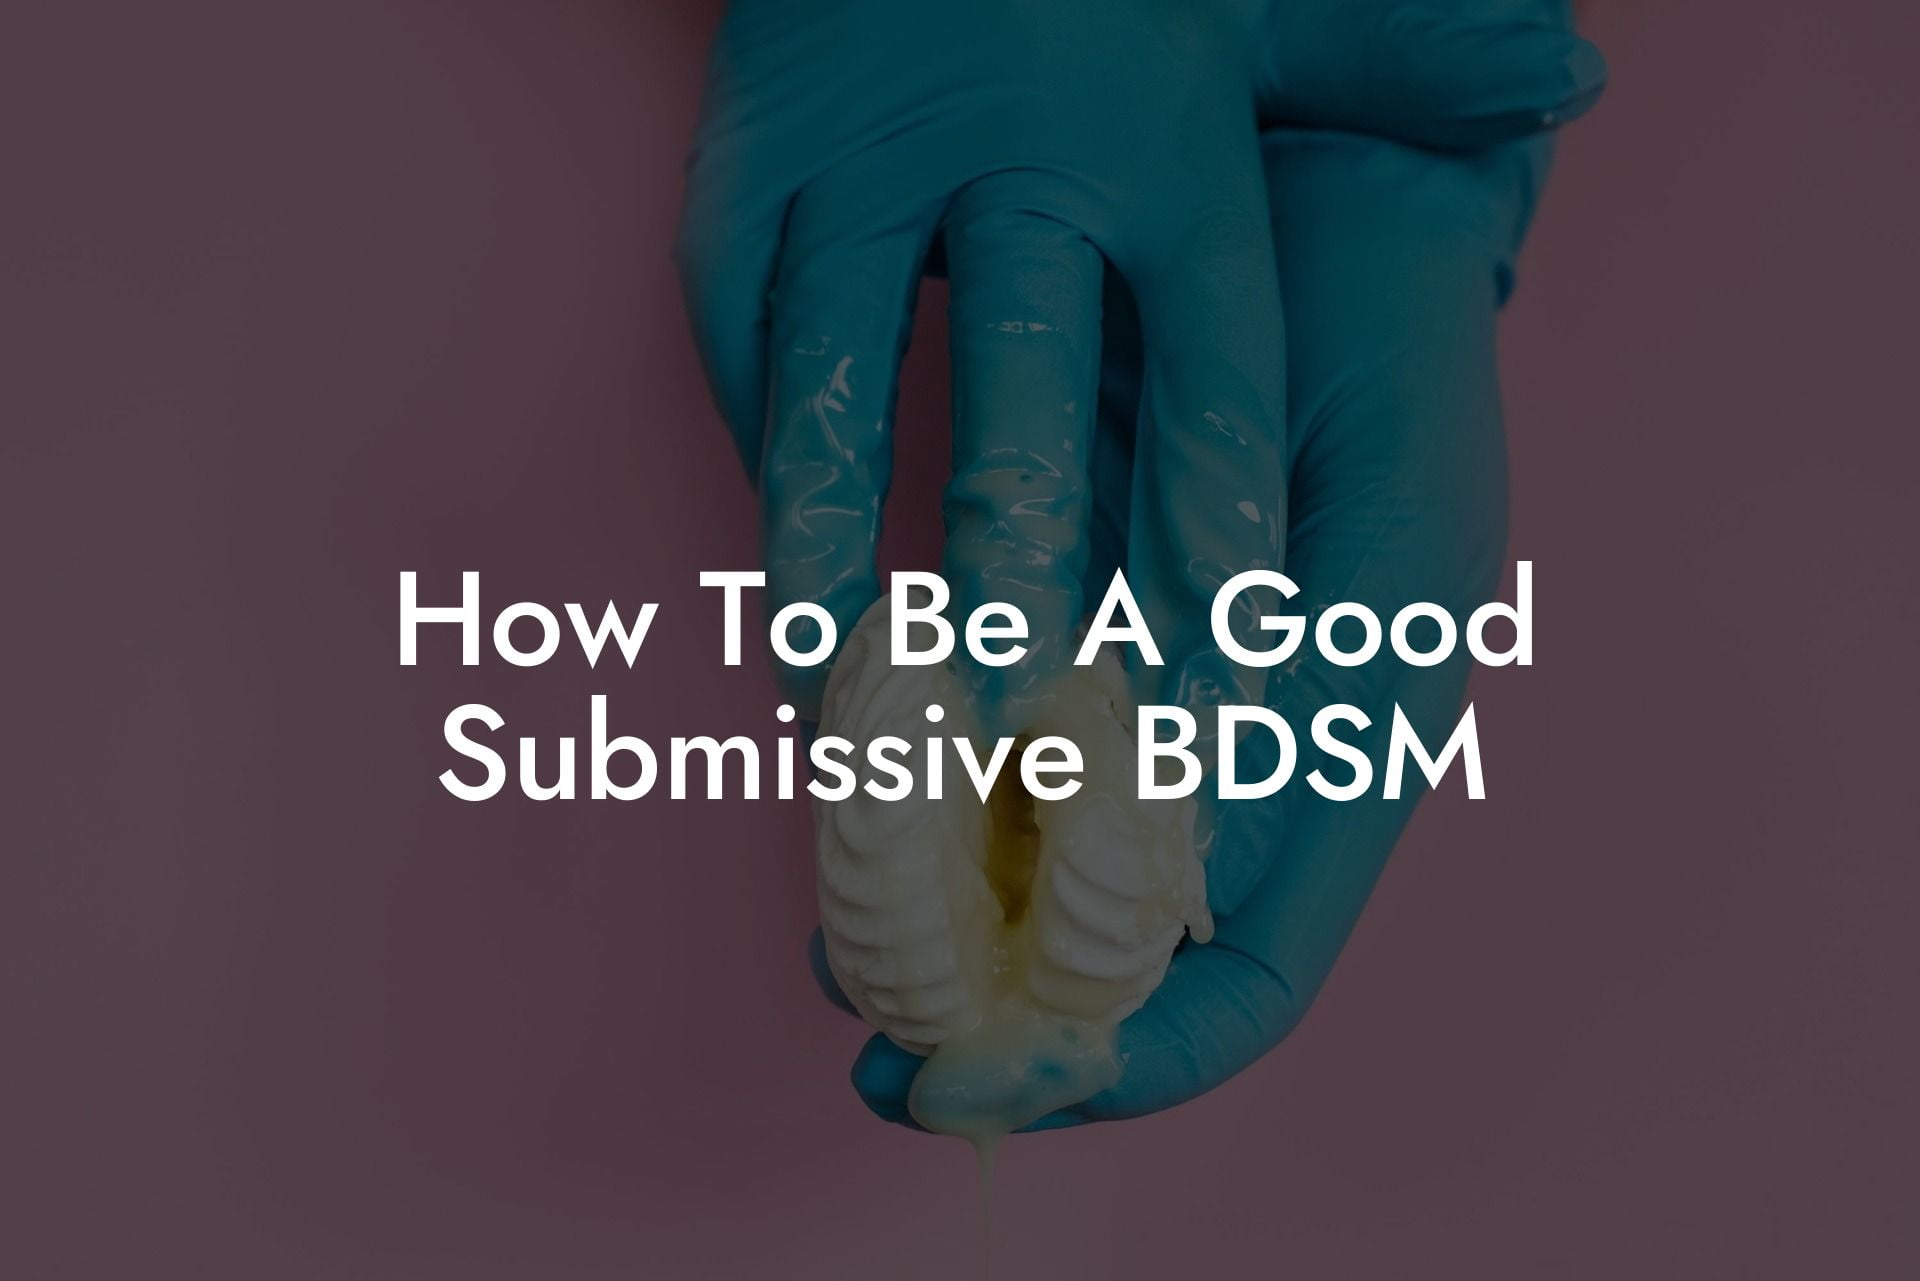 How To Be A Good Submissive BDSM